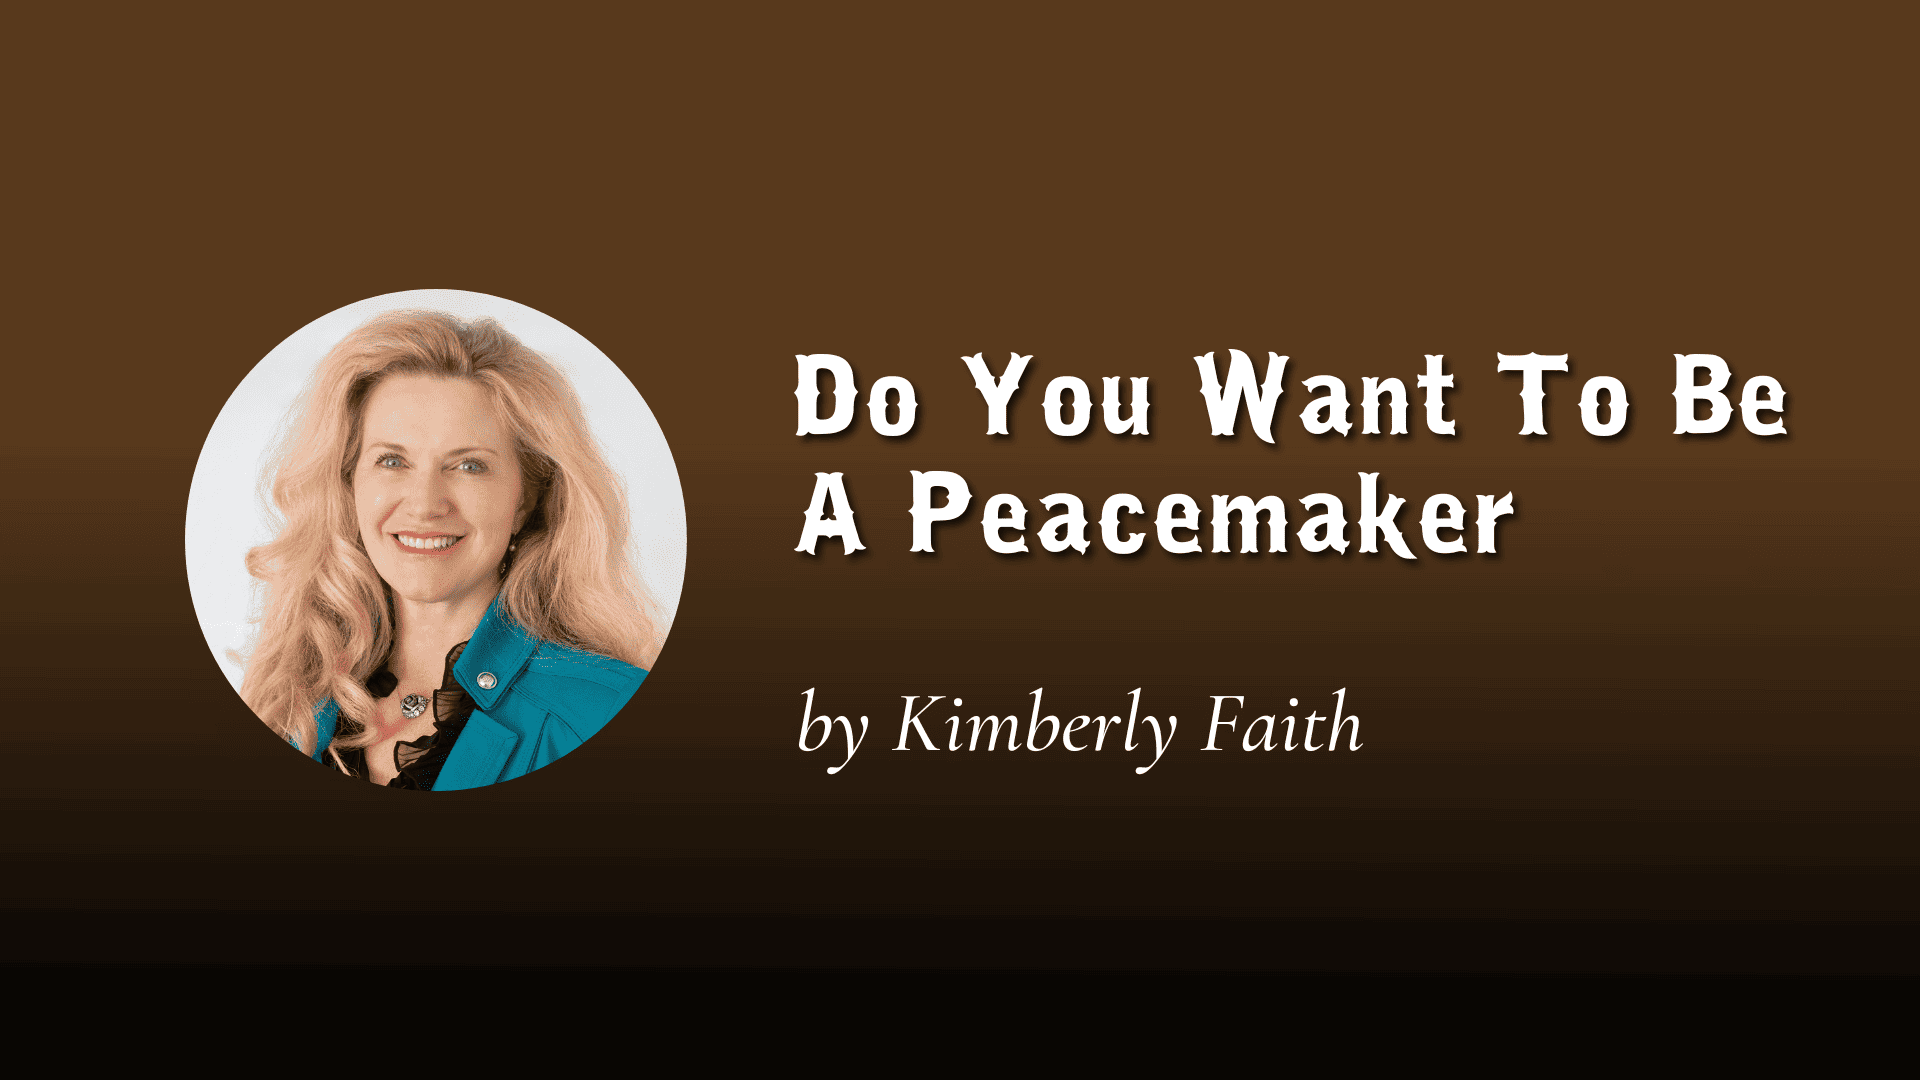 Do You Want To Be A Peacemaker